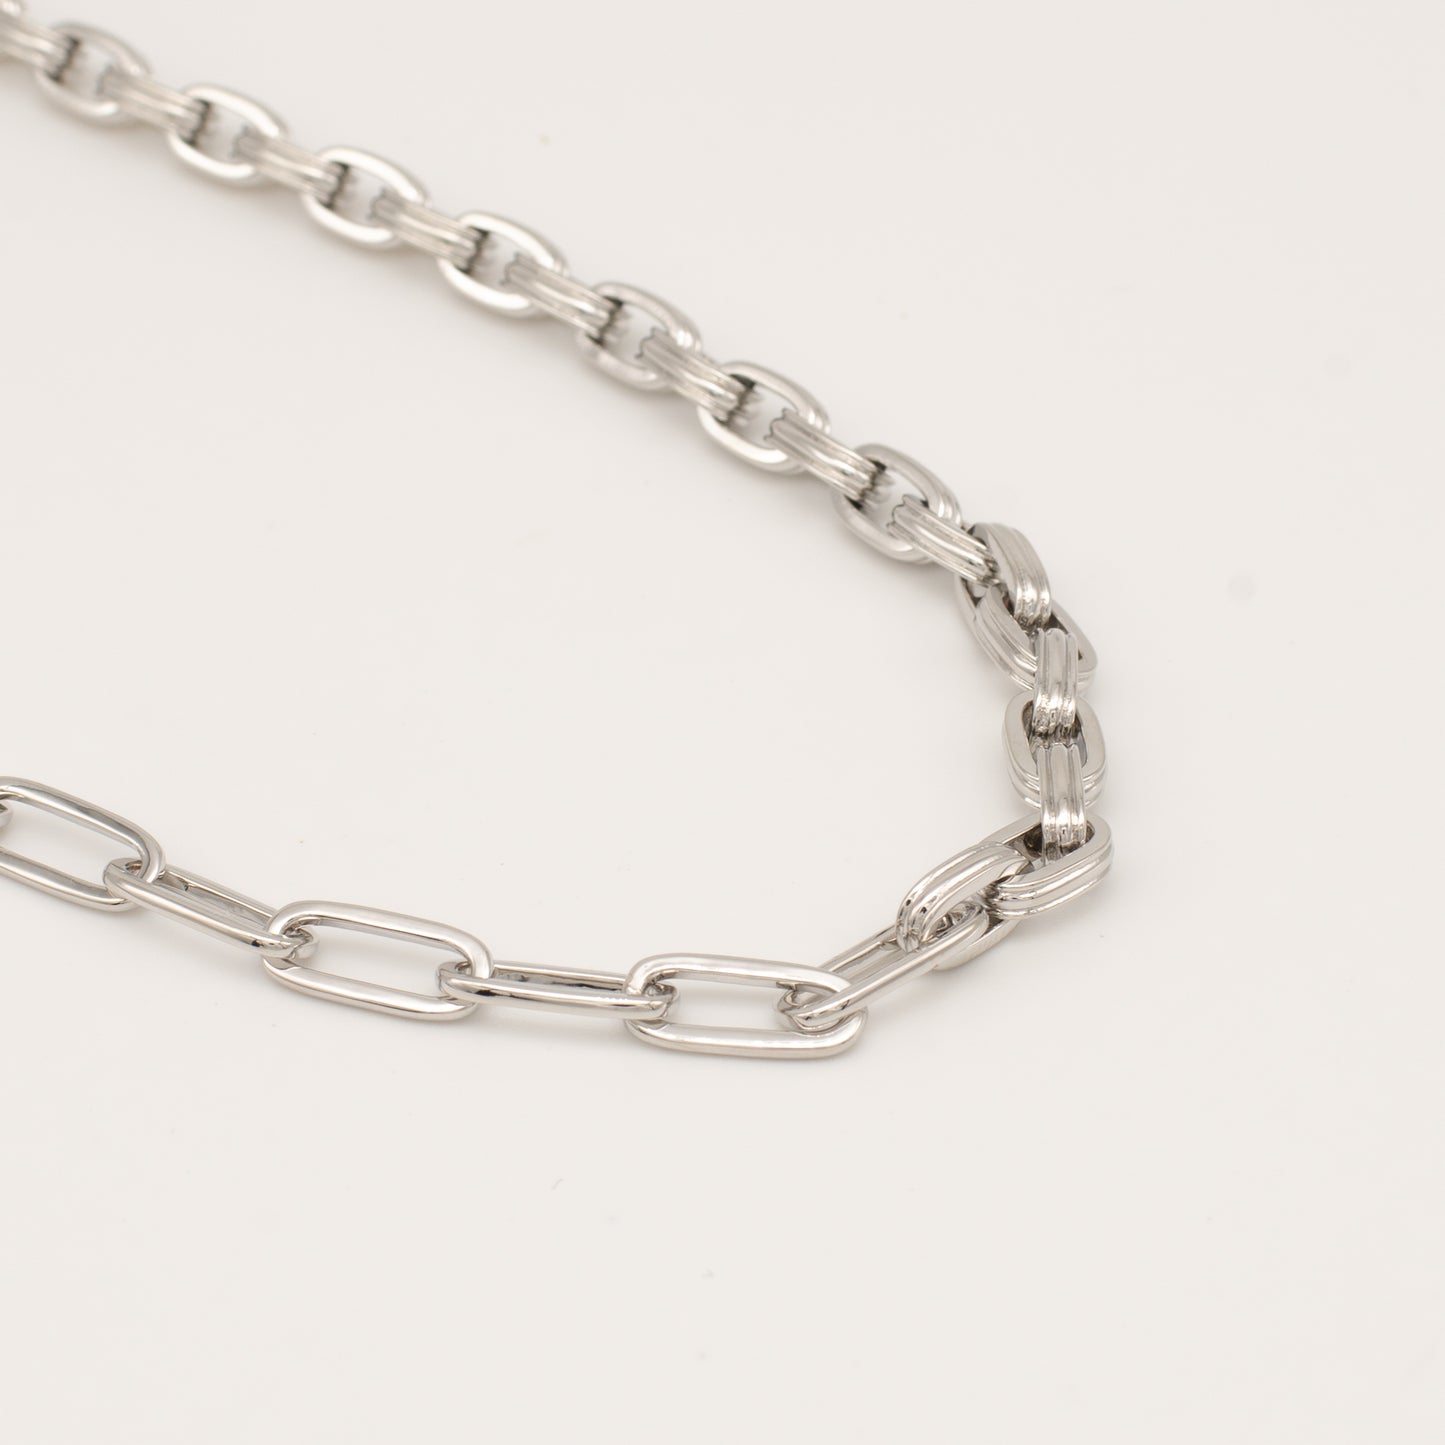 Double Link Chain Necklace